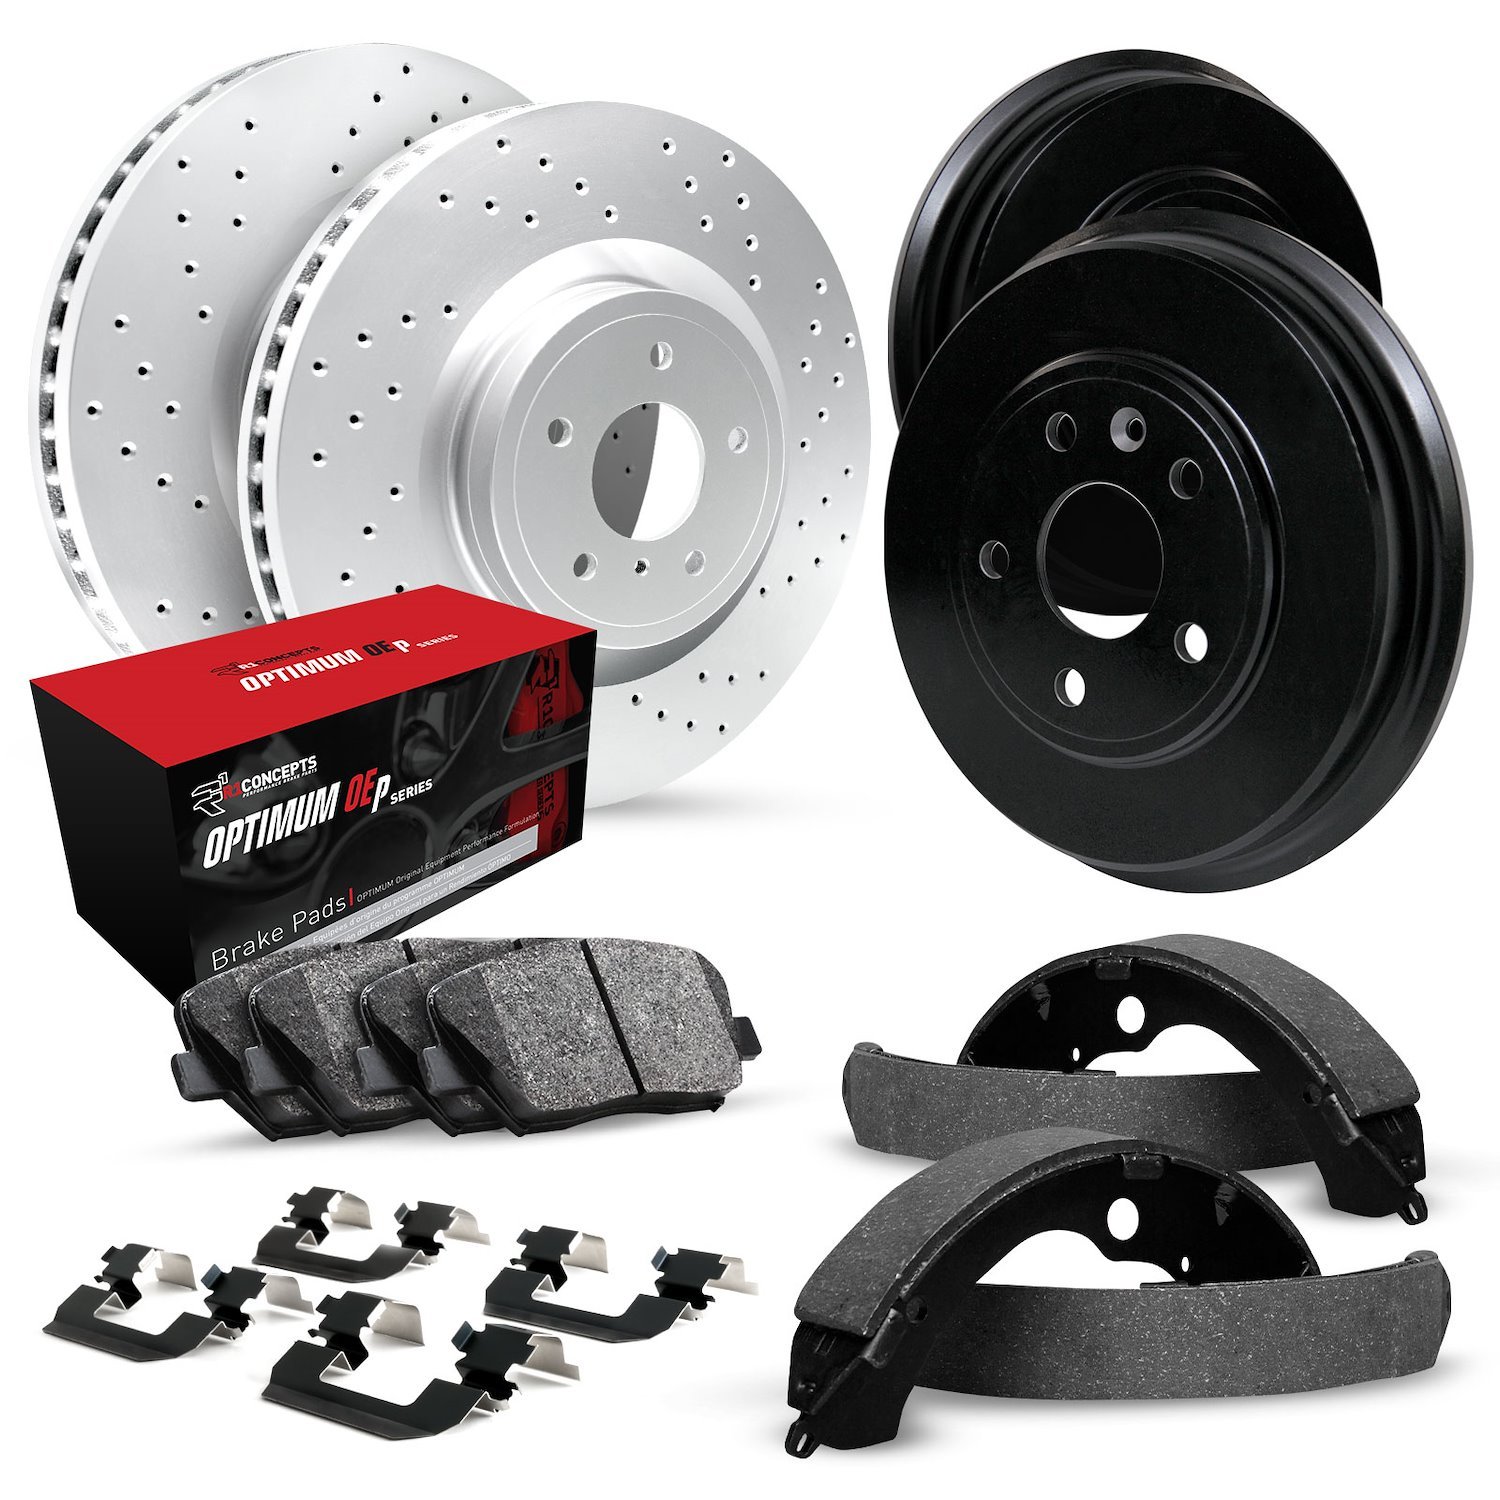 GEO-Carbon Drilled Brake Rotor & Drum Set w/Optimum OE Pads, Shoes, & Hardware, 1981-1987 GM, Position: Front & Rear